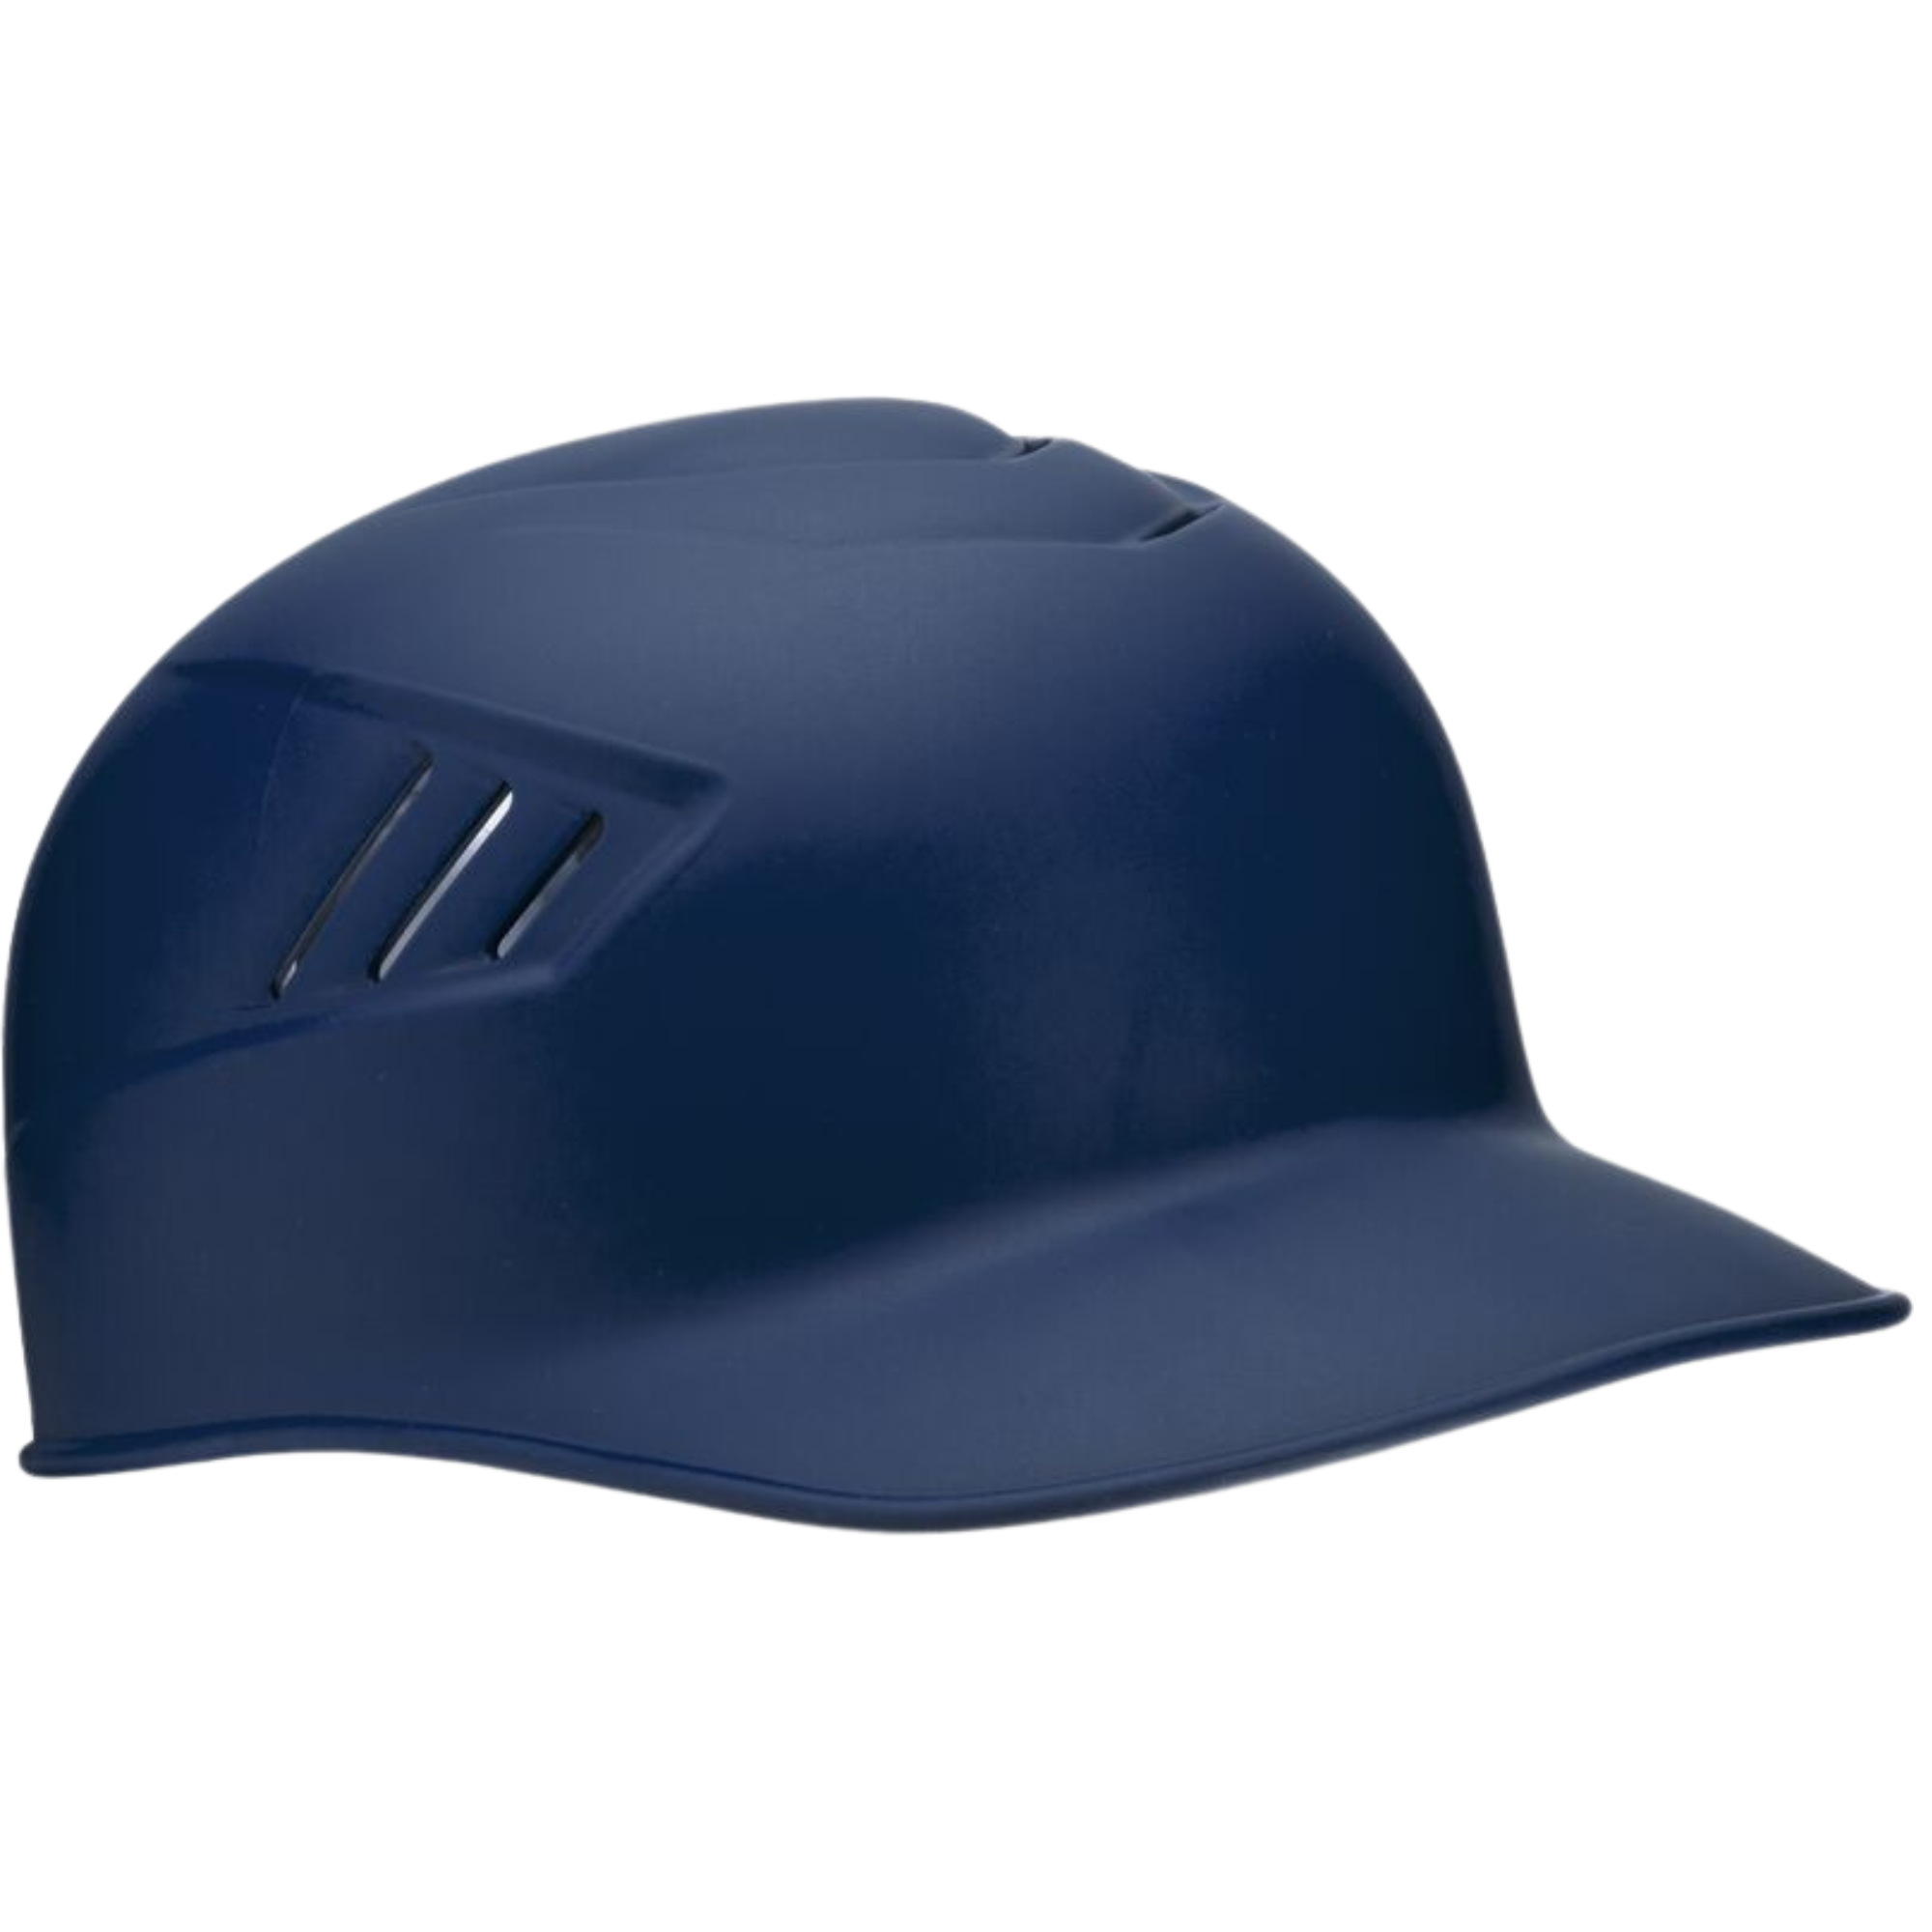 Rawlings Coolflo 1-Tone Catchers And Base Coach Skull Cap Helmet - Matte Navy